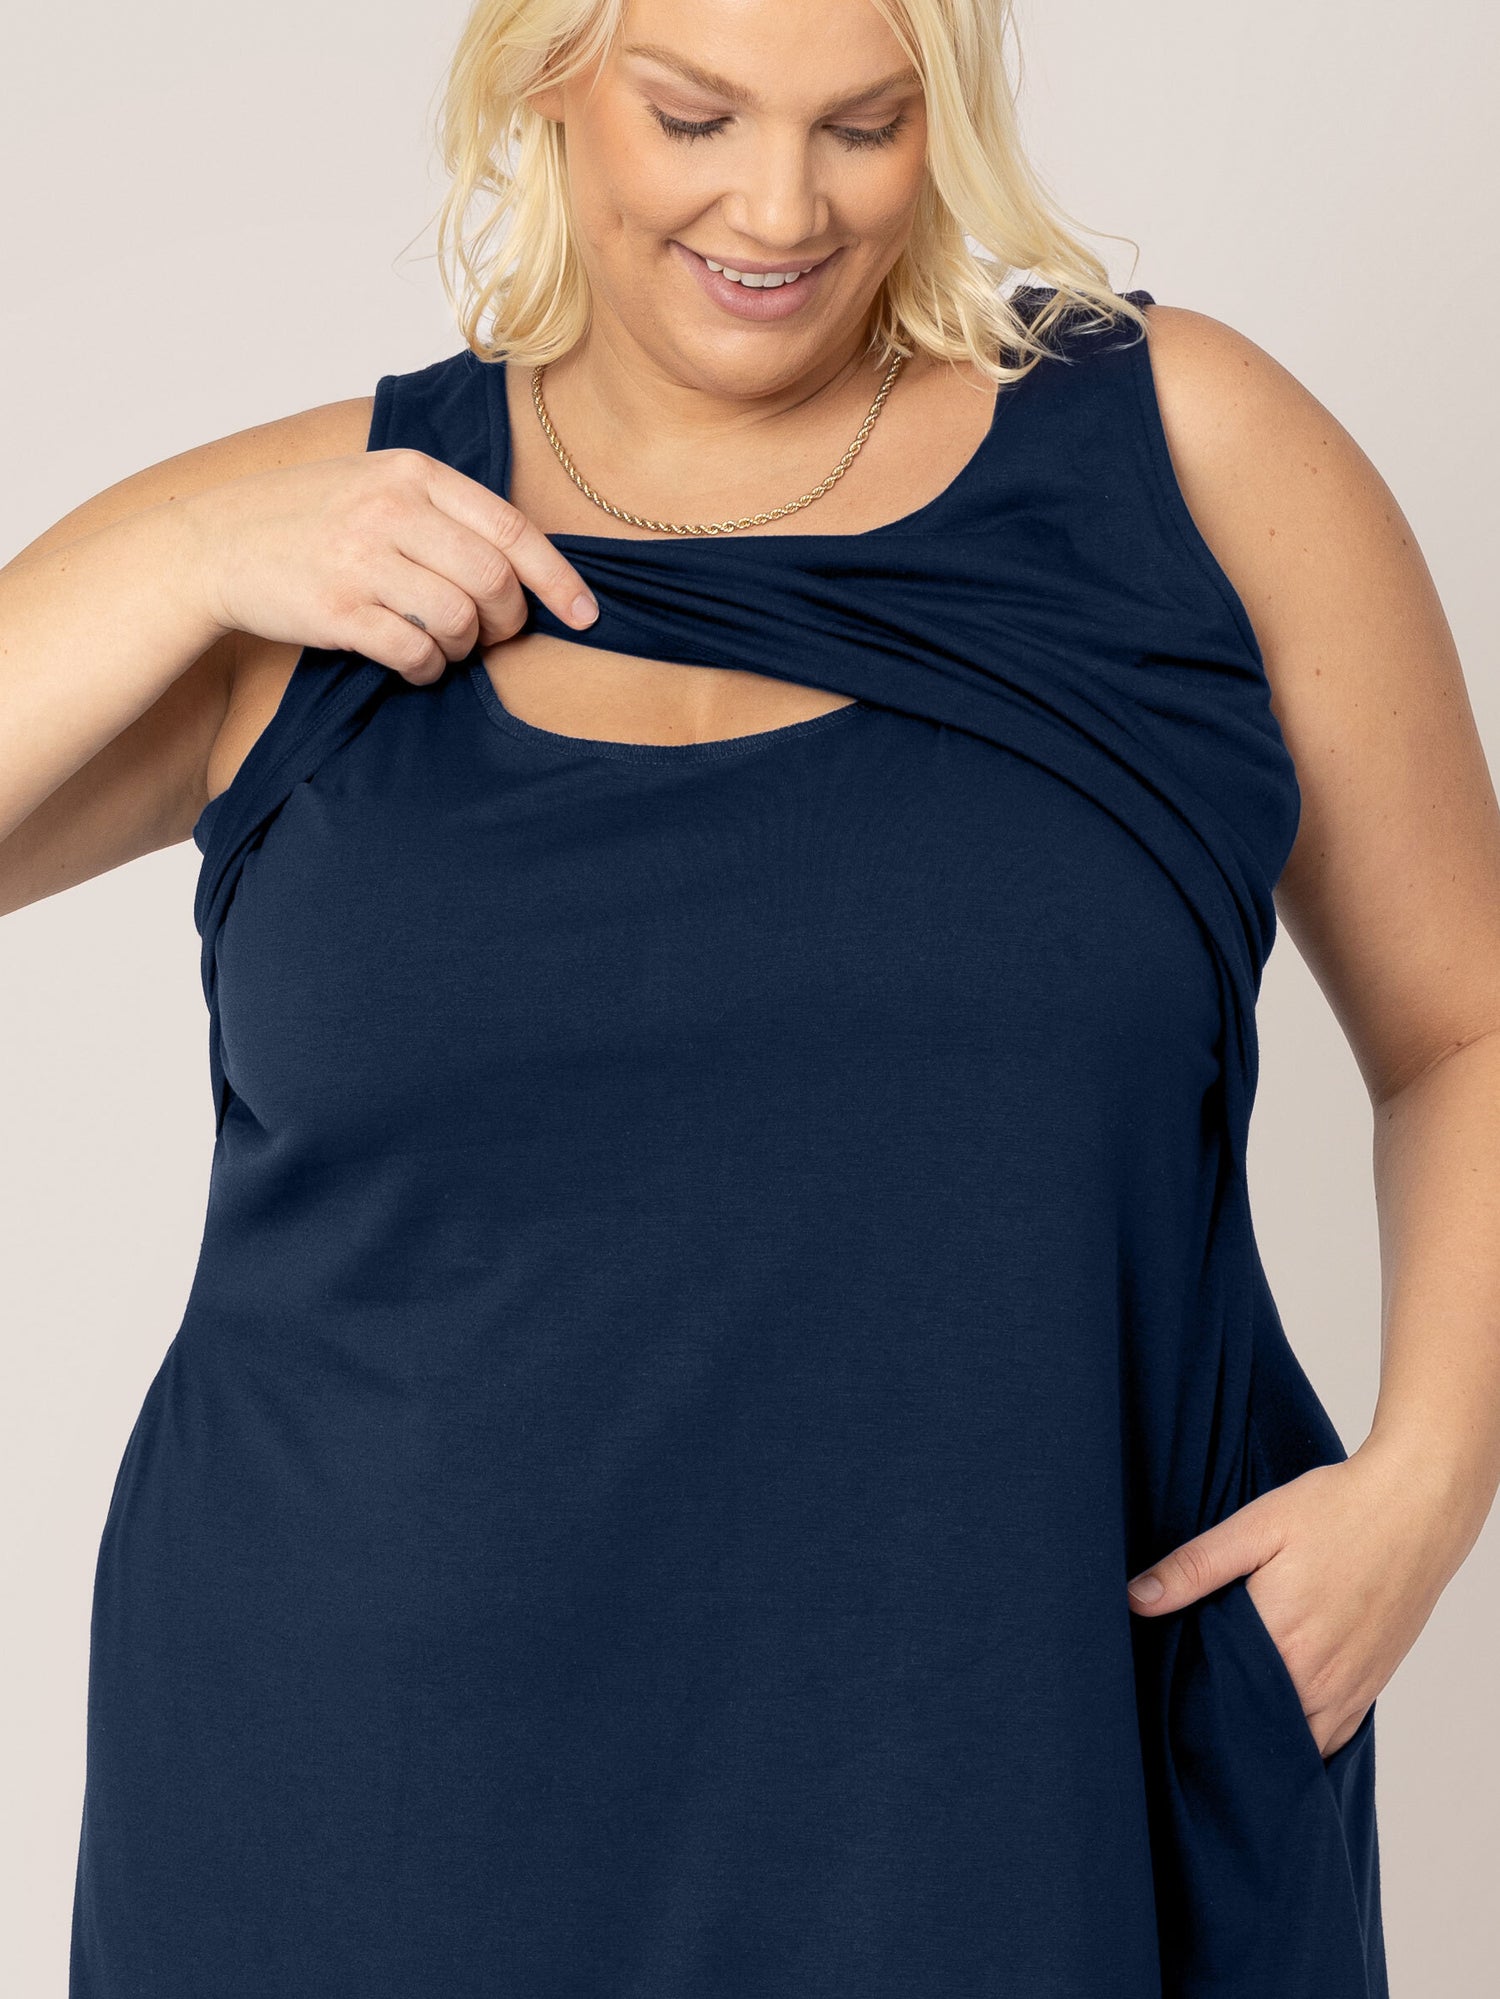 Model wearing the Penelope Crossover Nursing Dress in navy with focus on the nursing access